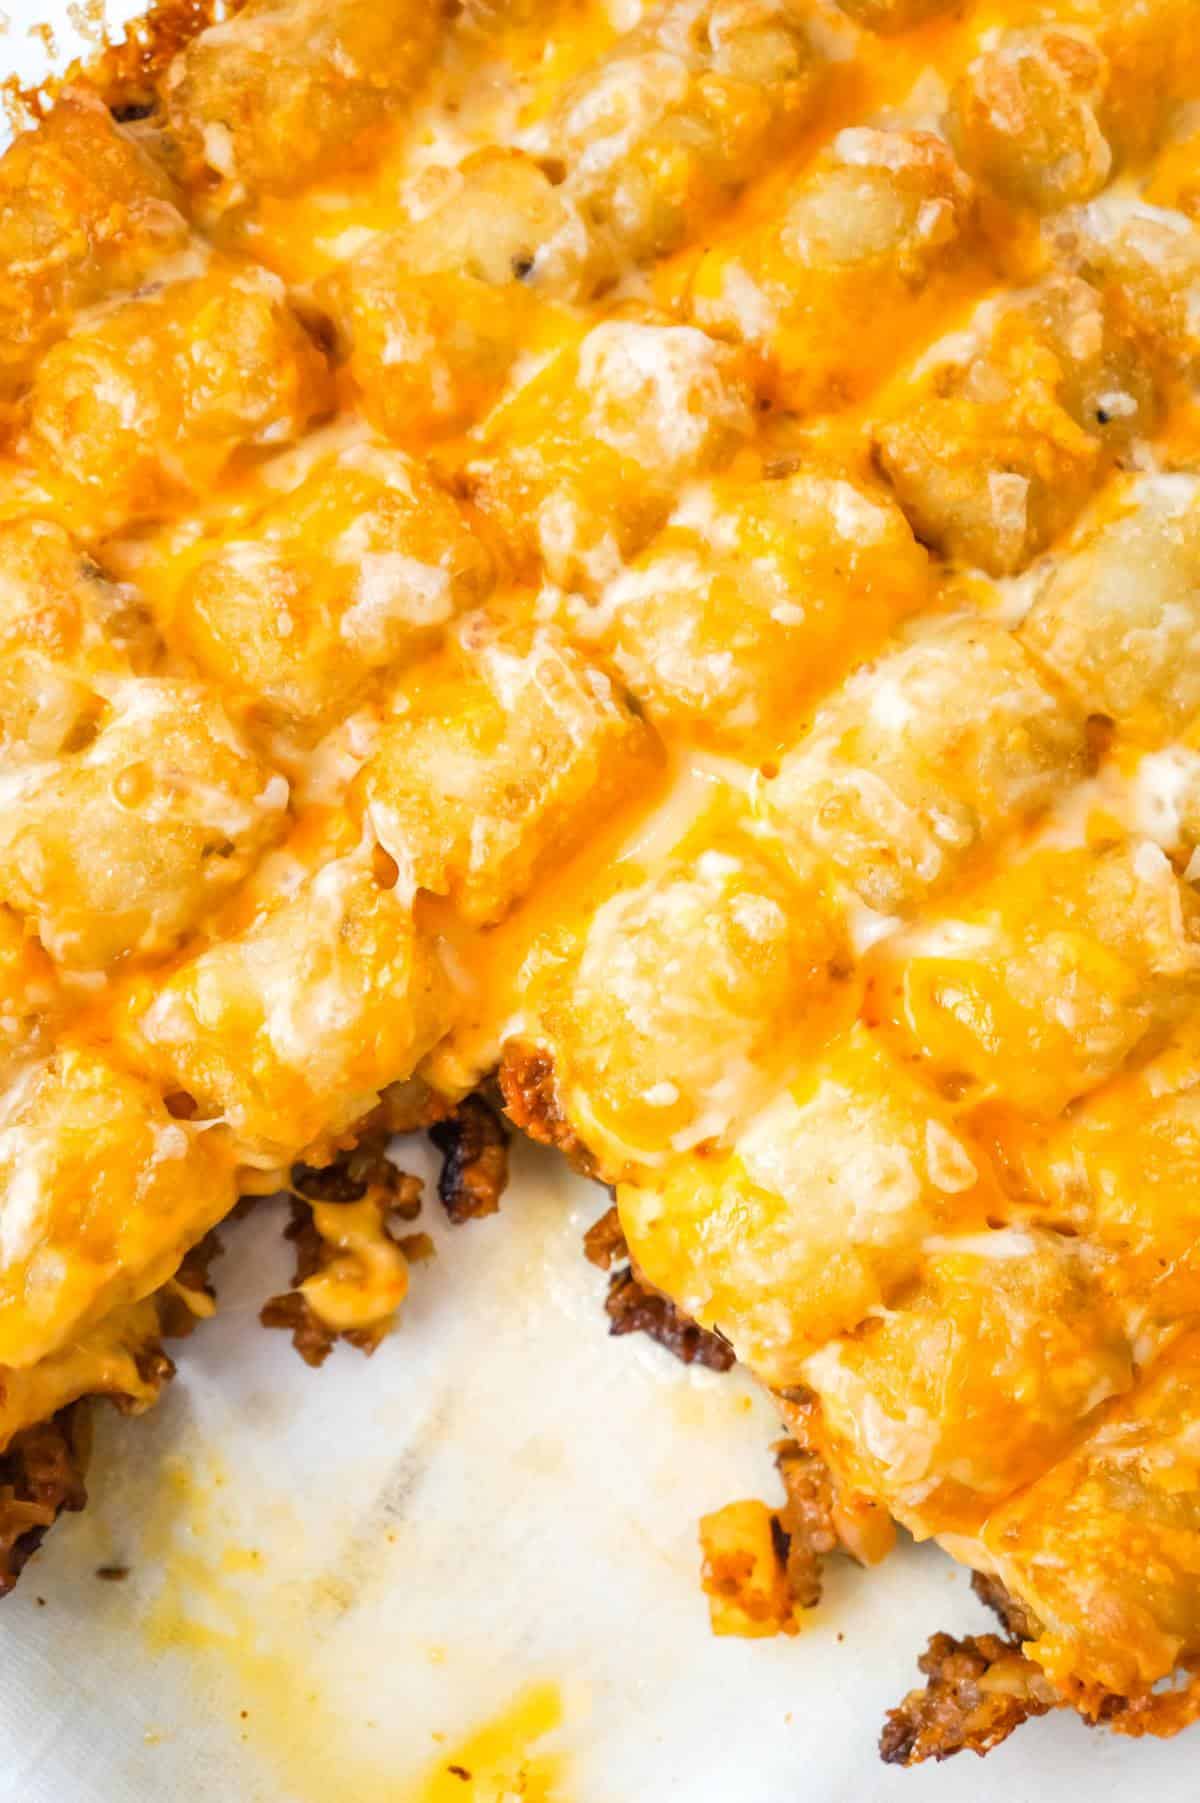 Sloppy Joe Tater Tot Casserole is an easy dinner recipe with a ground beef sloppy joe base, topped with cheese and tater tots.